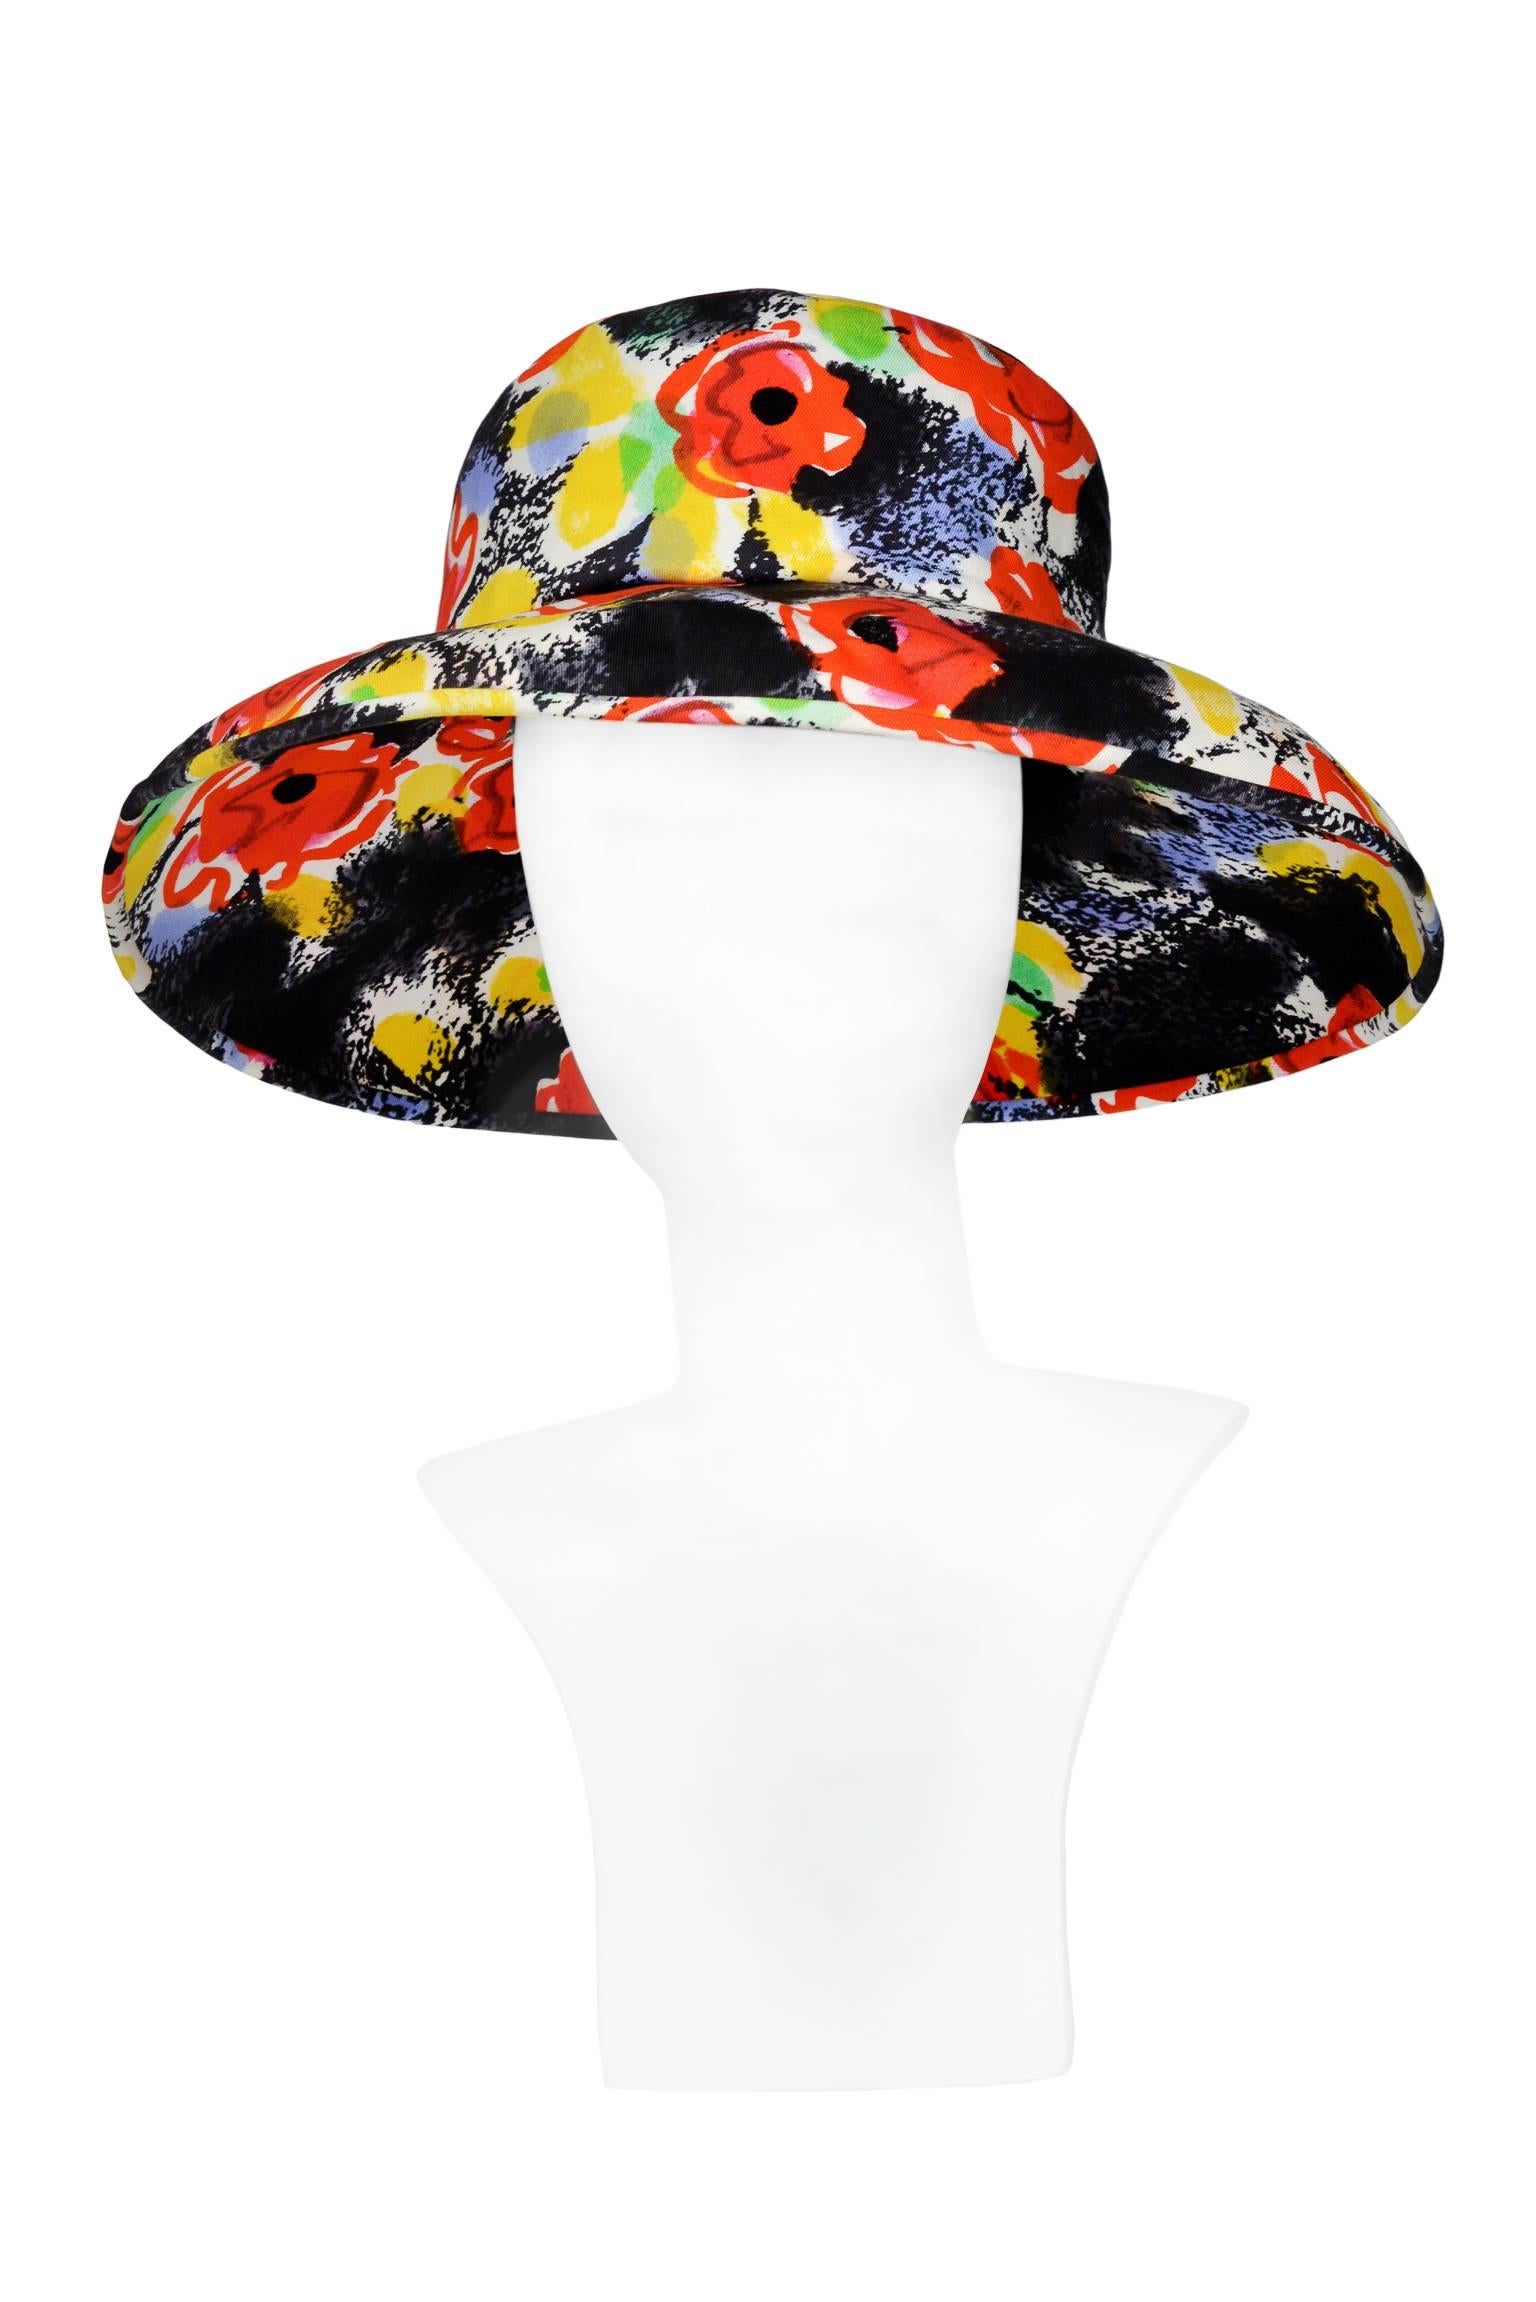 Vintage Chanel black cotton sun hat with red and yellow floral "Camellia" Pop Art style print. Large rim with small rim at back to easily lounge against a chair or chaise. Chanel label inside and interior headband finished with ribbon.